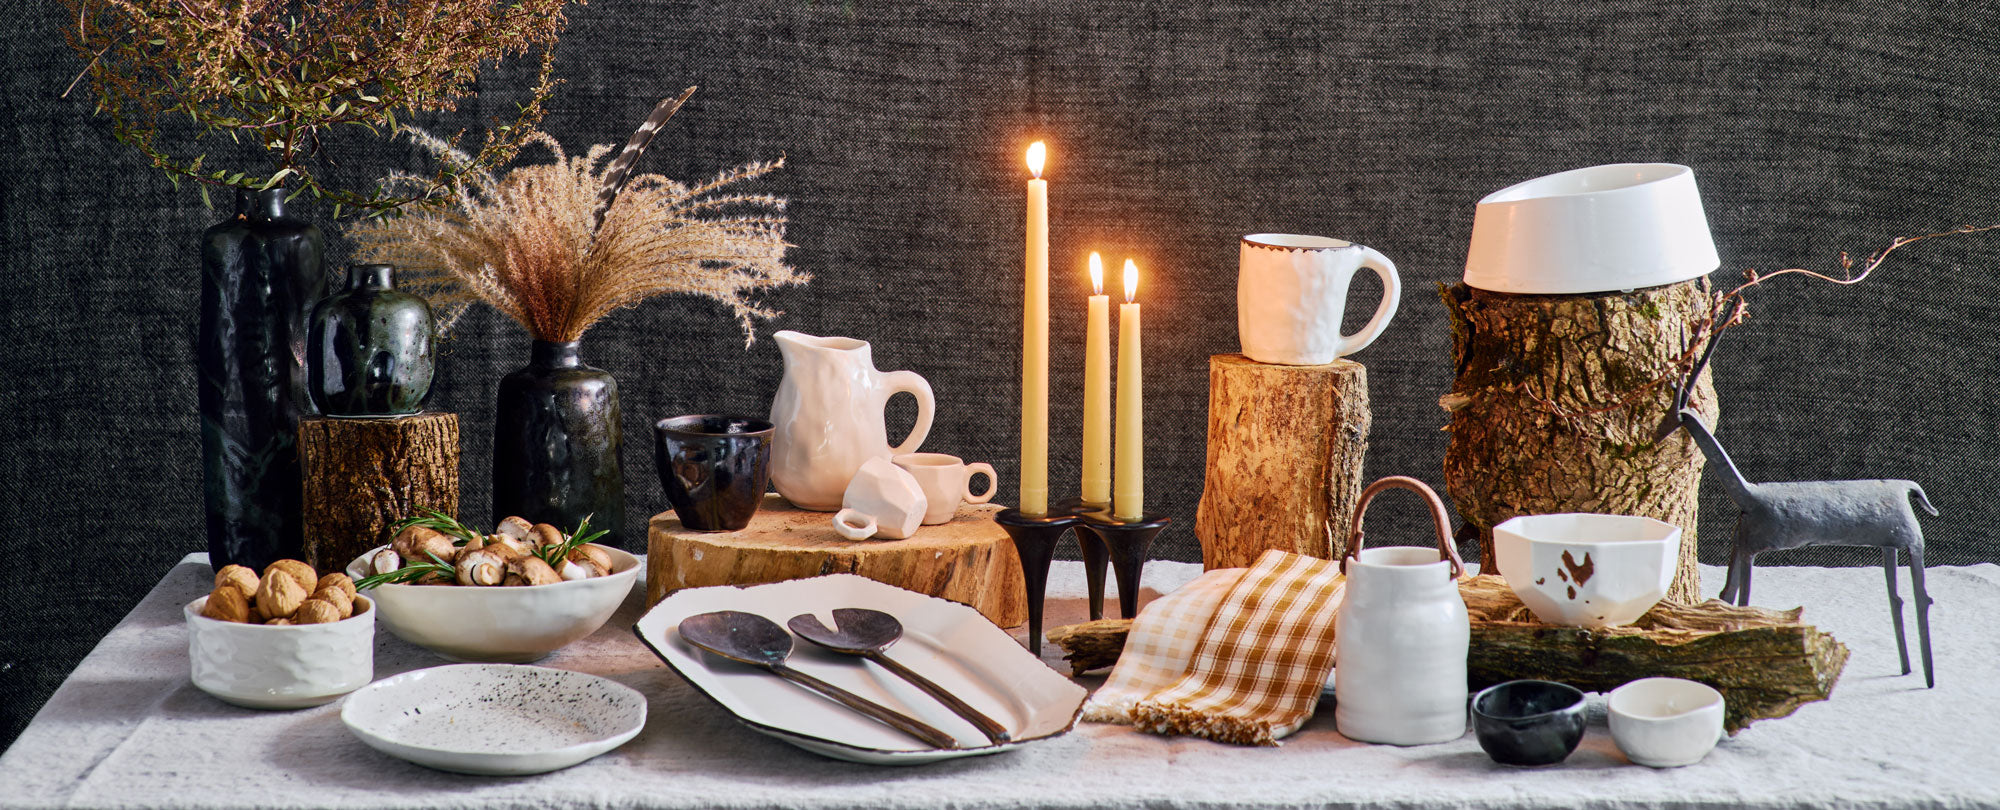 DBO HOME 2023 holiday gift guide spread of everyday luxury handmade ceramic and bronze pieces arranged on an elegant and rustic holiday table with lit candles and wood details